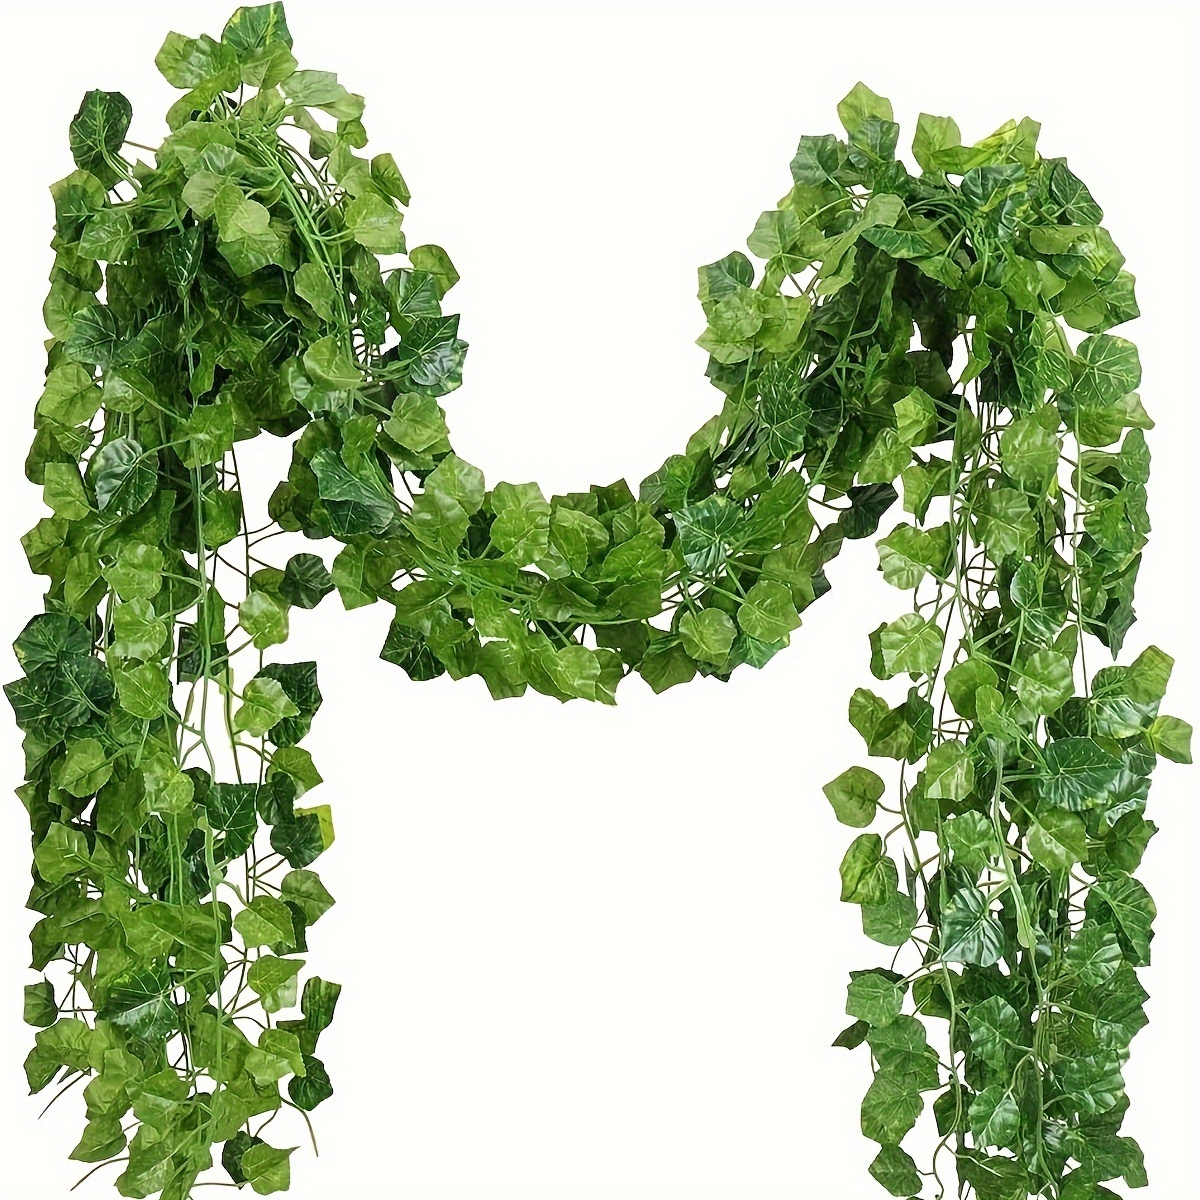 

12 Packs, Artificial Ivy Greenery Garland, Fake Vines Hanging Plants Backdrop For Room Bedroom Wall Decor, Green Leaves For Jungle Theme Party Wedding Decoration